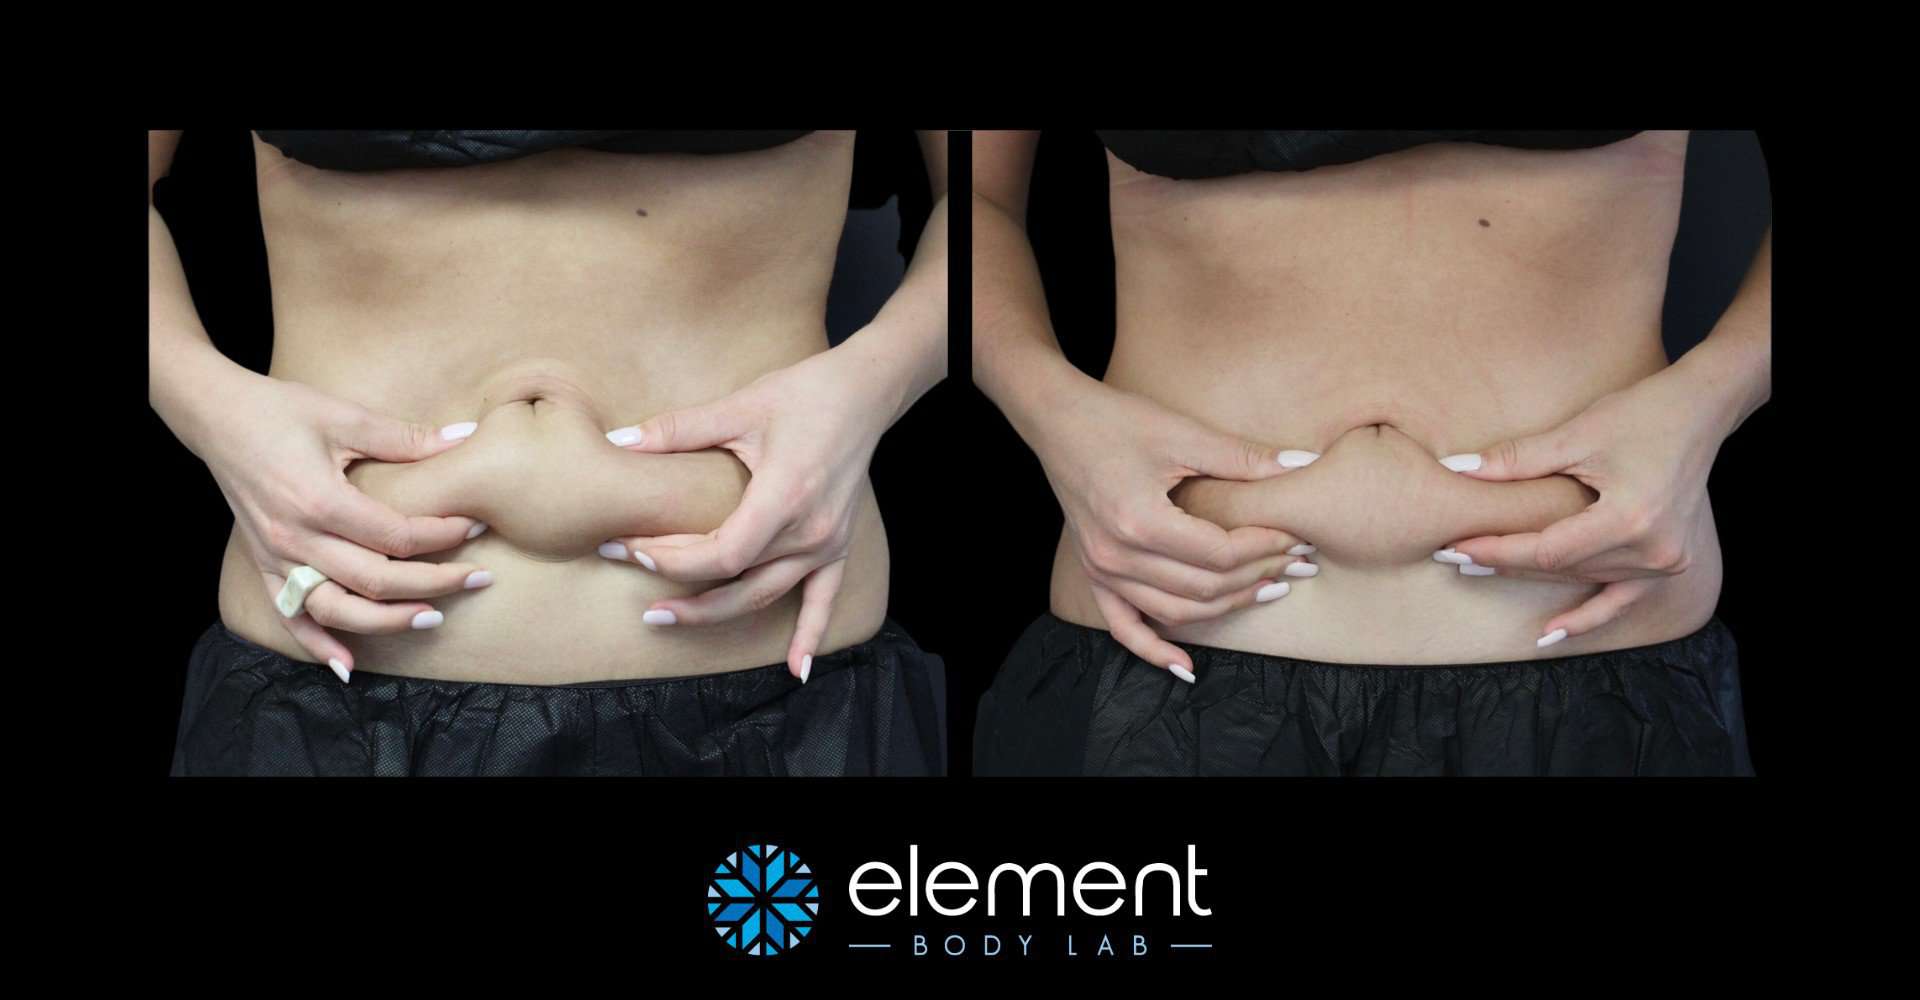 CoolSculpting Before and After Picture of Female Lower Abdomen